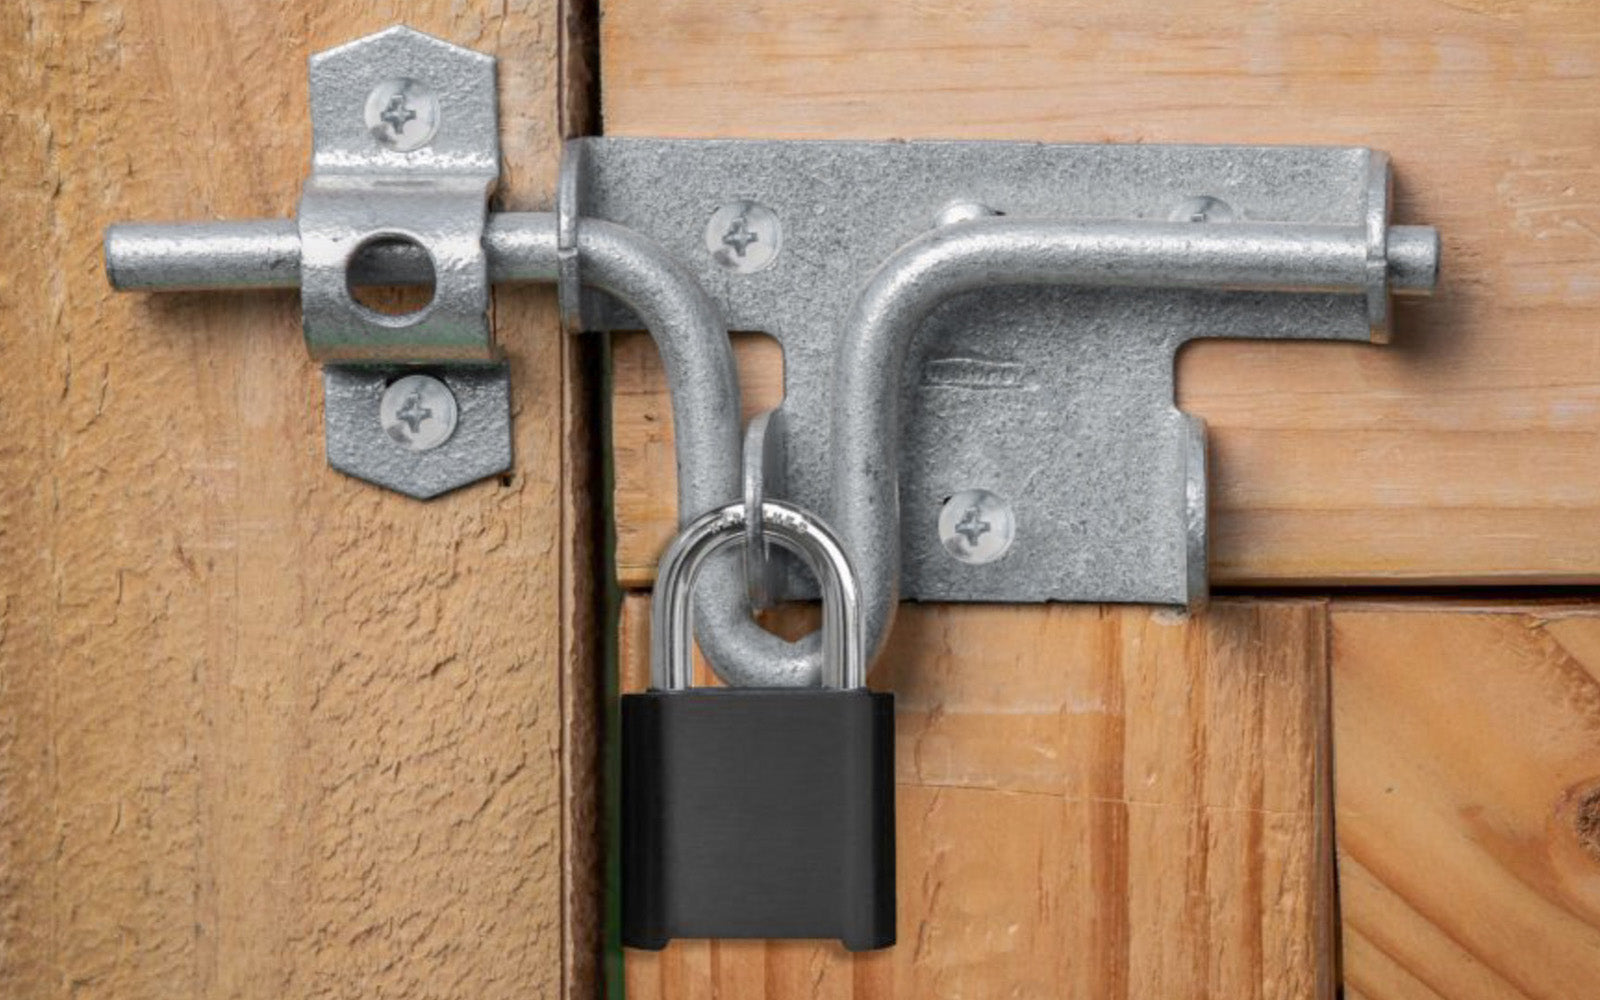 Galvanized Finish Sliding Bolt Latch. Designed for doors & gates swinging in or out. Easy operating, handle serves as a pull. Slide bolt latches right or left. May be padlocked. National Hardware Catalog Model No. N262-147.